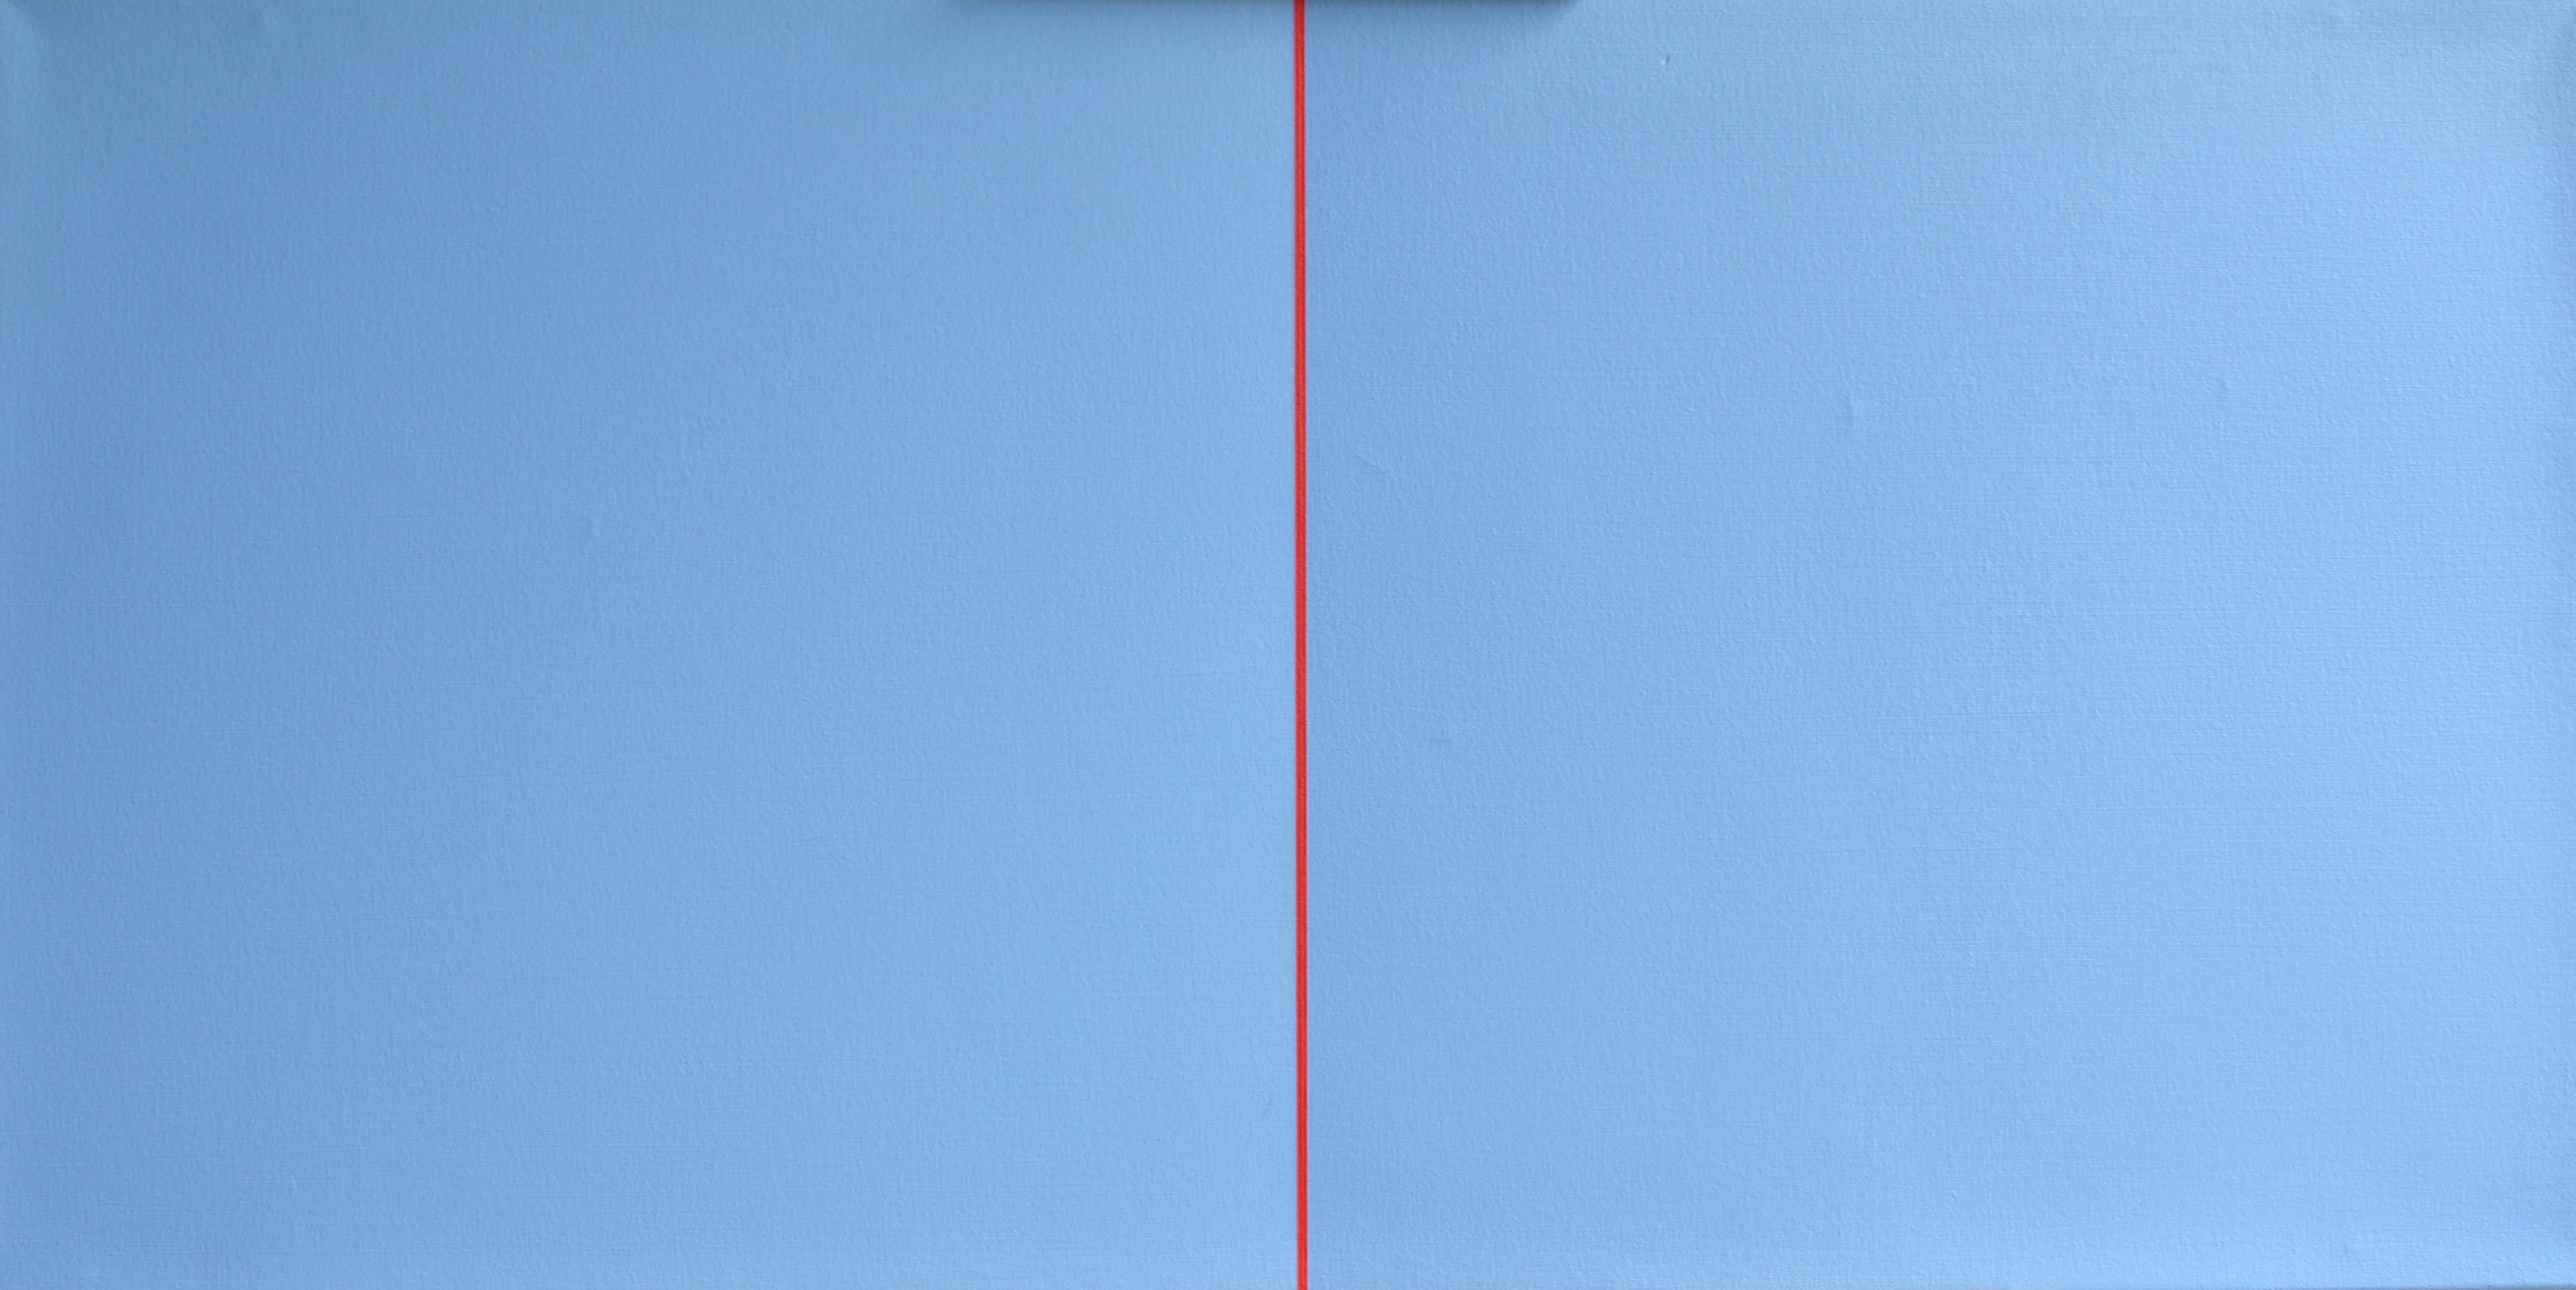 Luke Frost is the sixth artist to emerge from the current Tate St Ives Artist Residency at Porthmeor Studios, St Ives. An abstract painter, his works explore the pictorial possibilities of colour. Built up in layers to a refined, smooth surface,